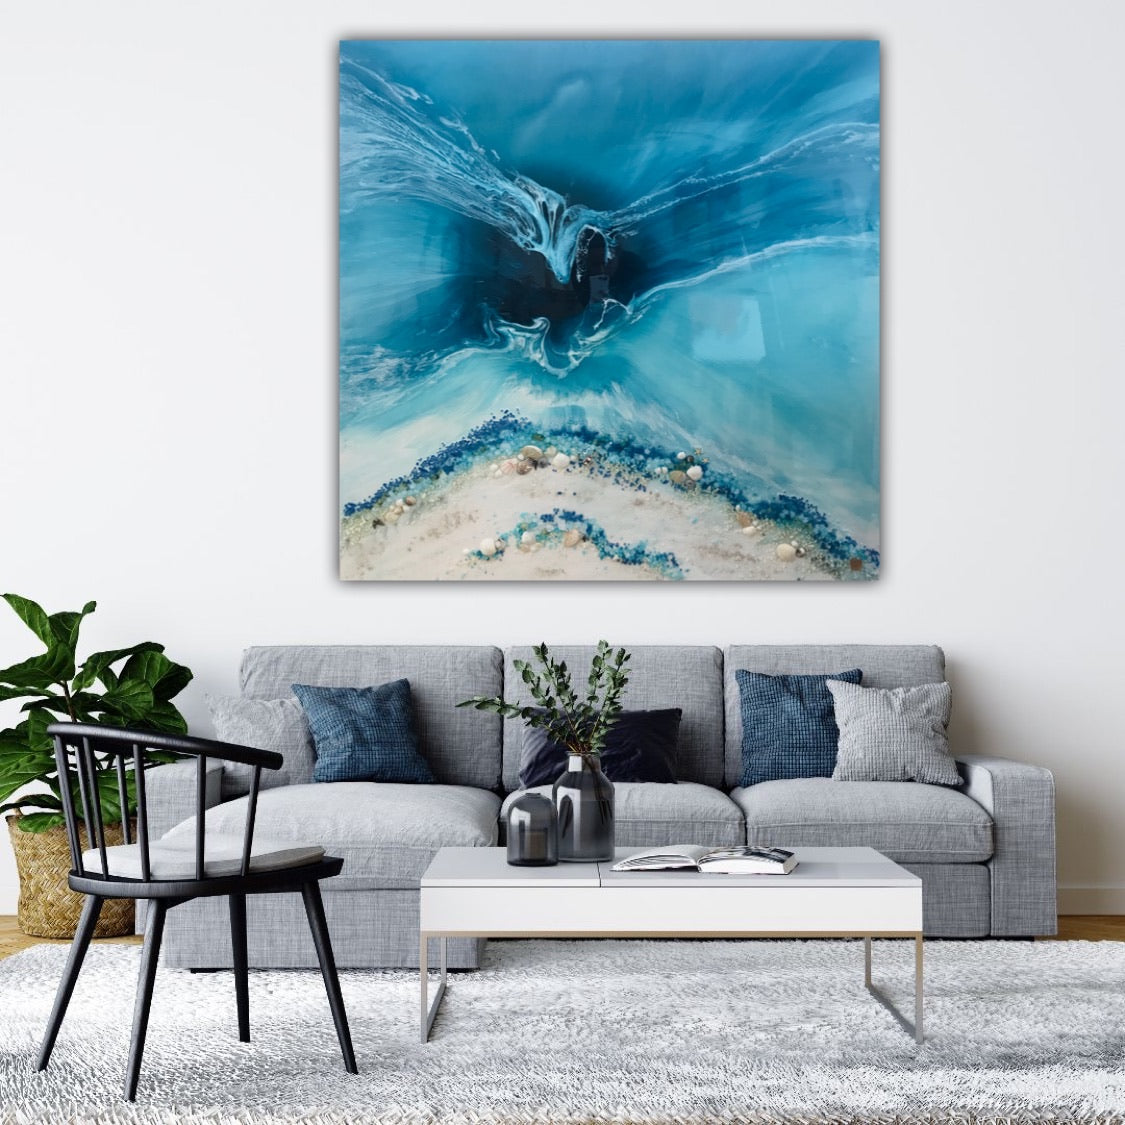 TEAL AND WHITE. Crystal clear. Ocean Original Artwork. Antuanelle 8 Clear. Artwork with Amazonite. 90x90cm